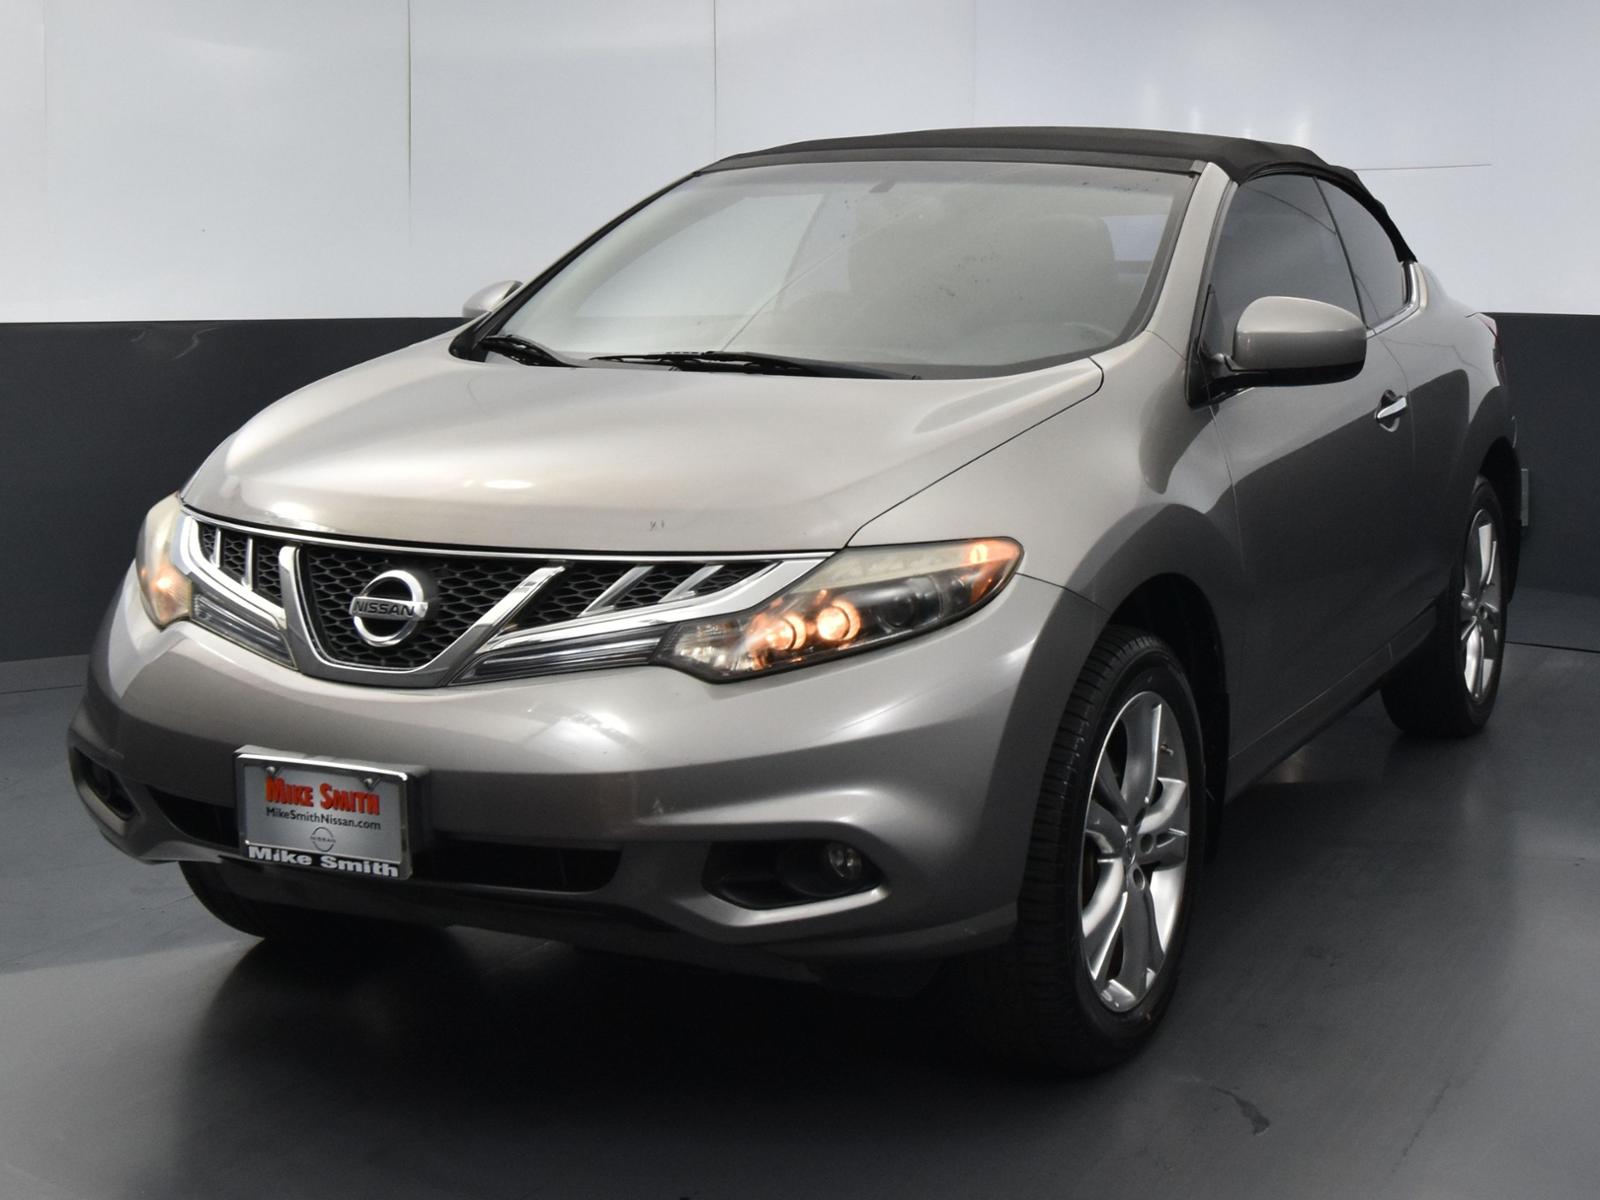 Pre-Owned 2012 Nissan Murano CrossCabriolet AWD 2dr Convertible Sport  Utility in Beaumont #CW100167 | Mike Smith Honda